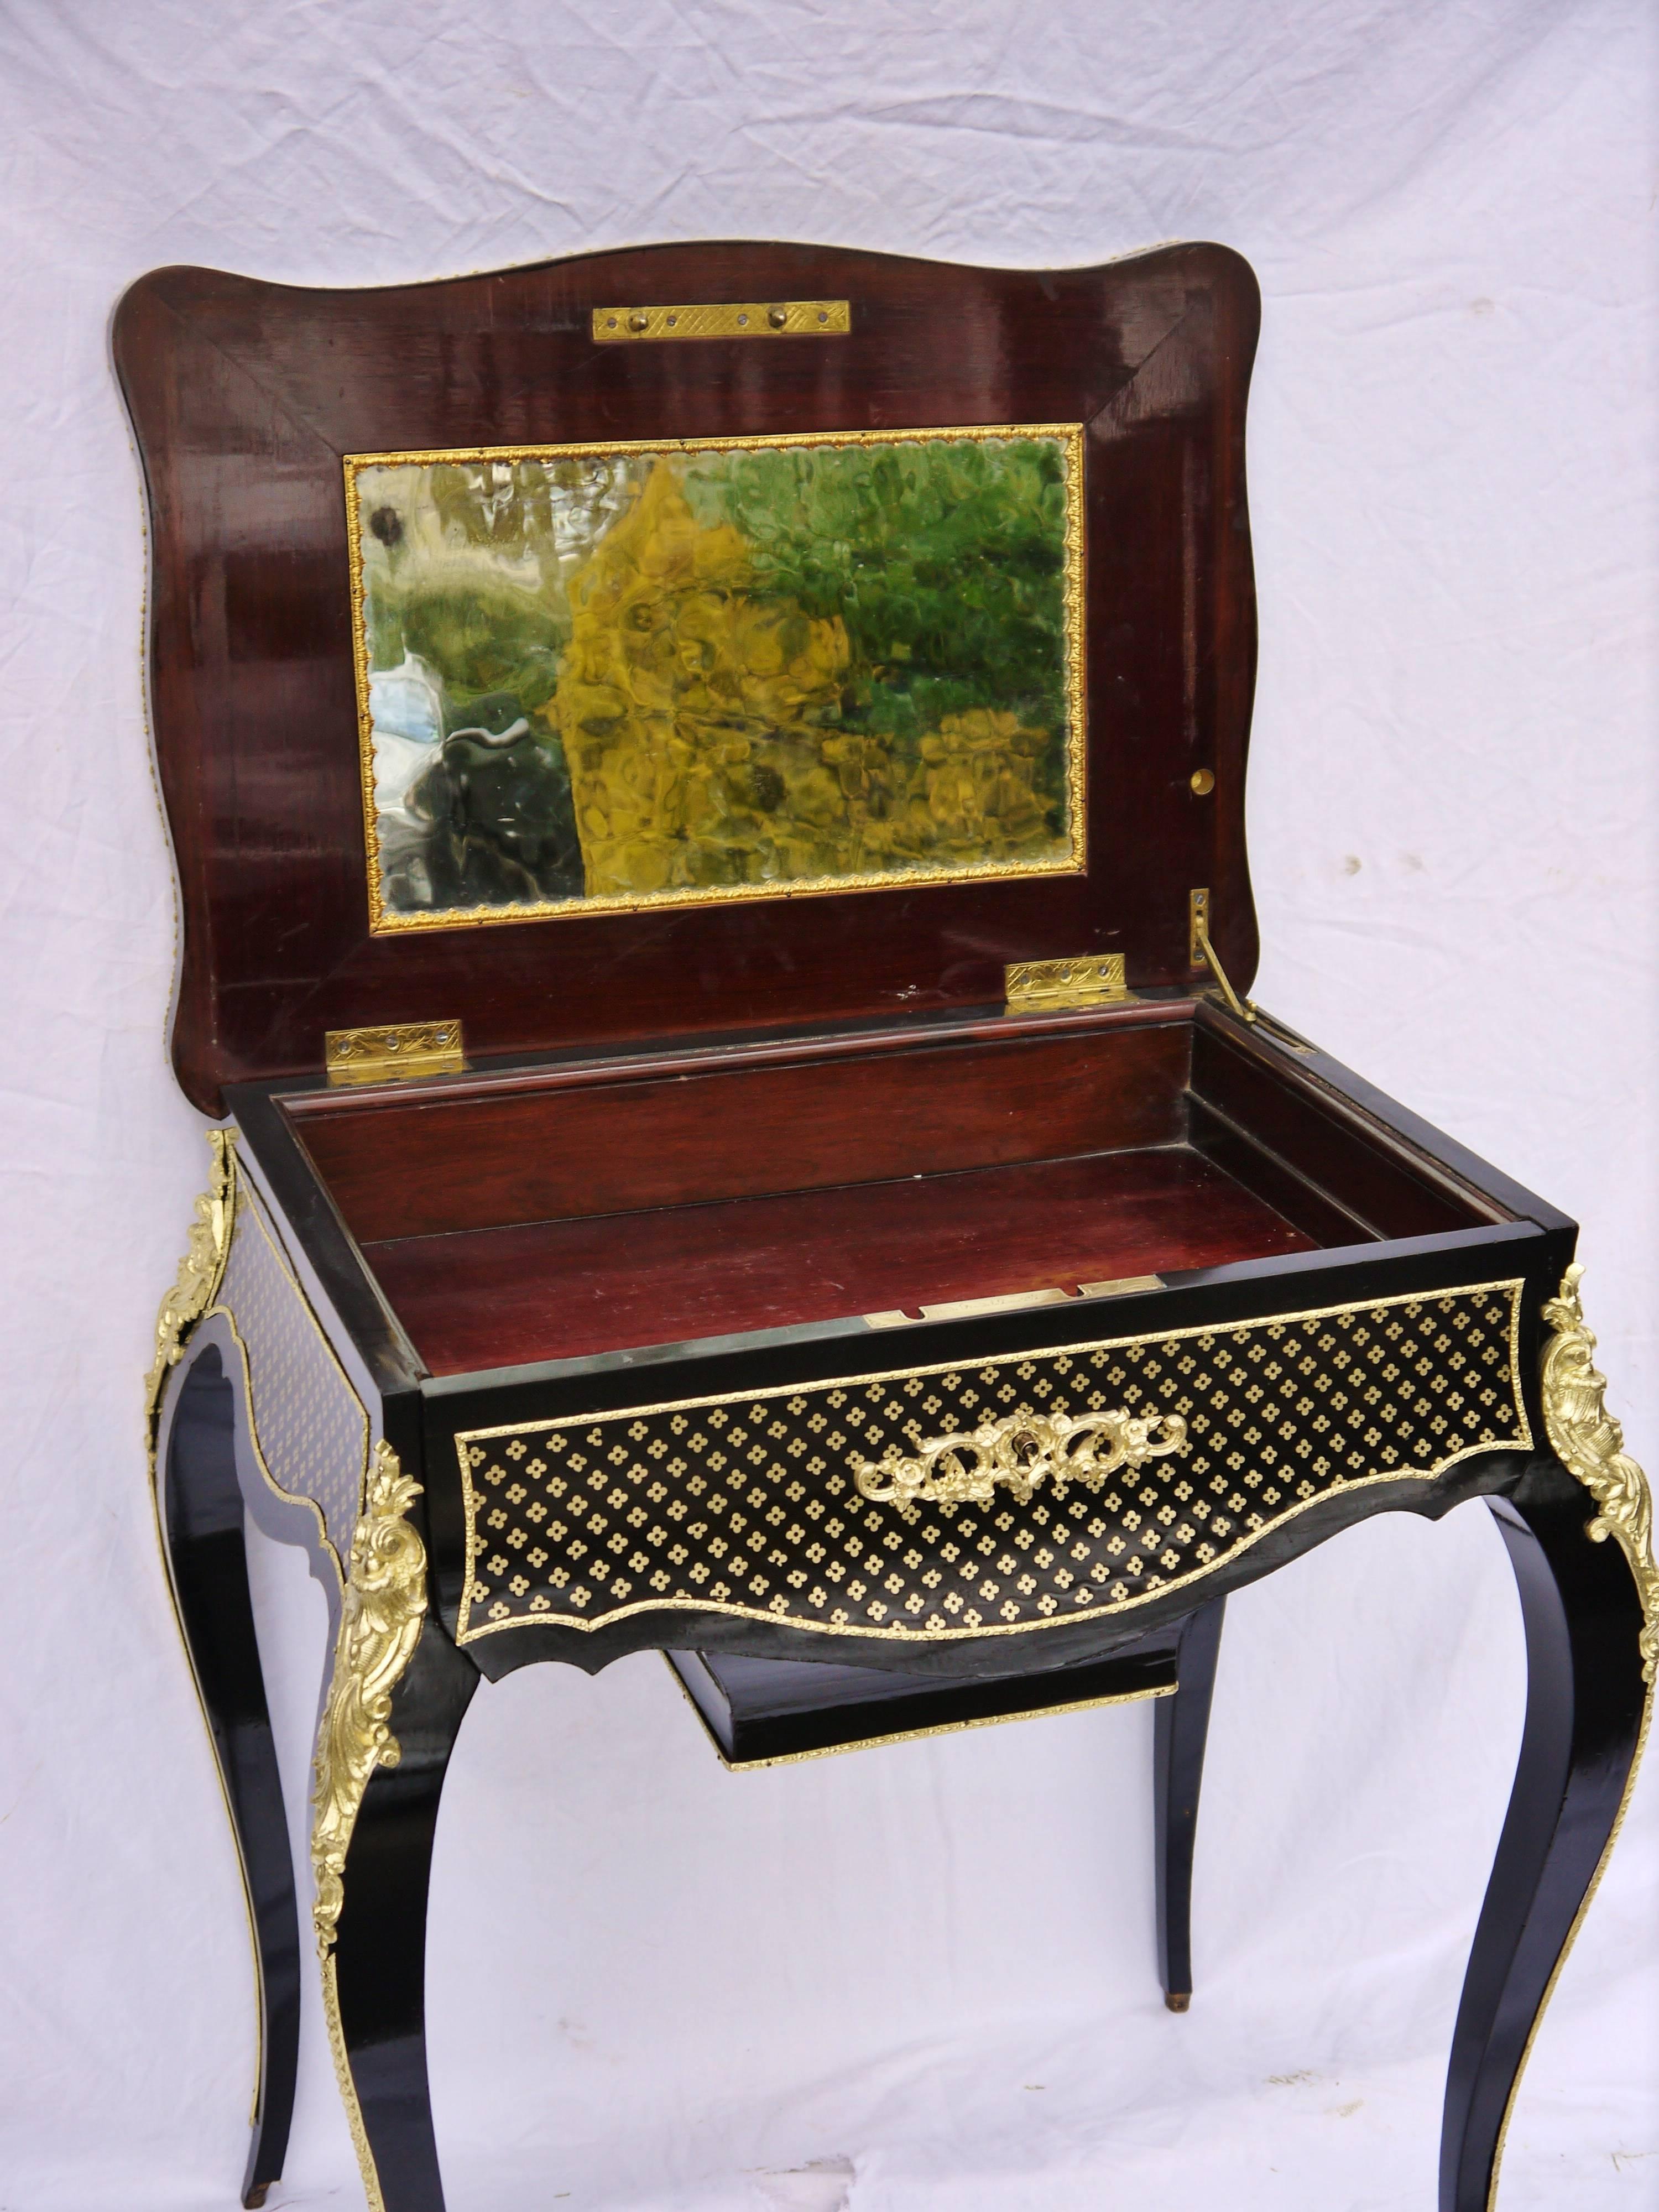 
Charming 19th century, Louis XV Style, Ebony Boule Marquetry Travailleuse Side Table in Ebony veneered and Boule style marquetry 